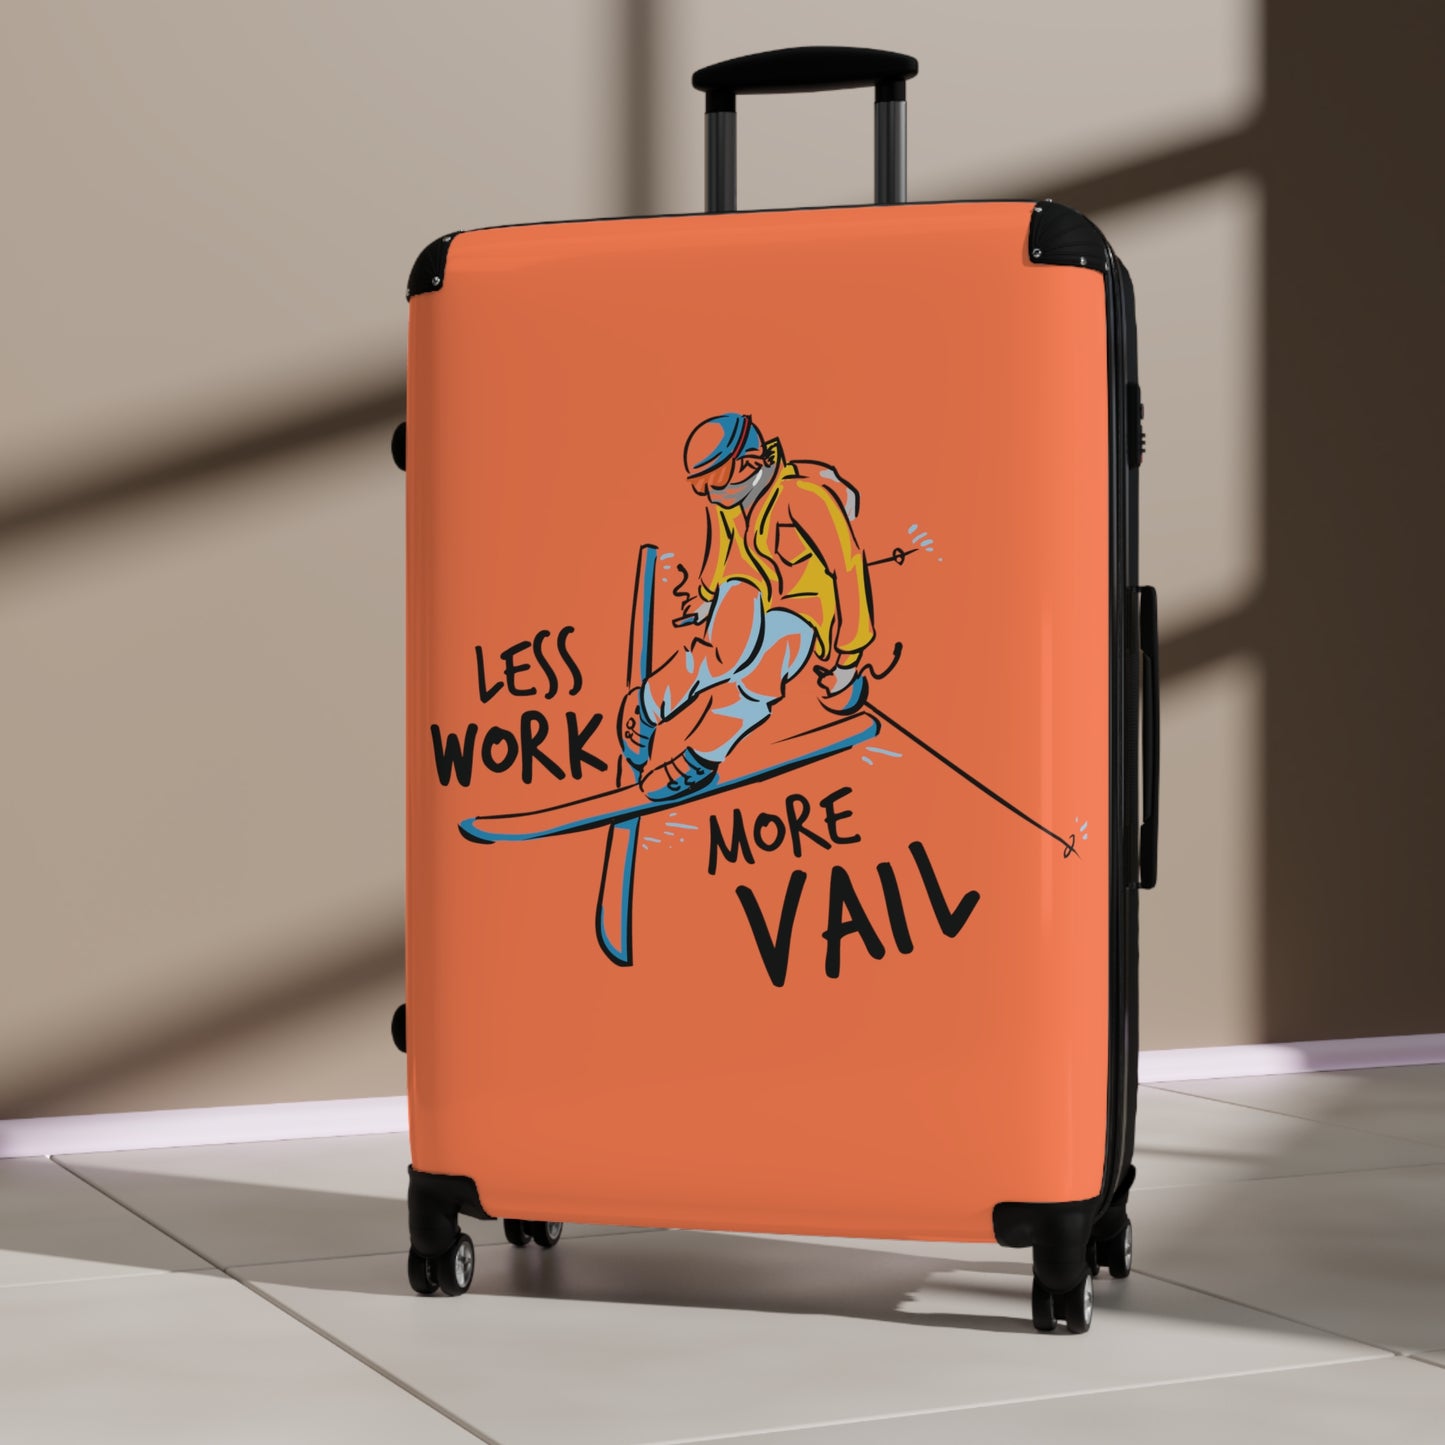 Less Work More Vail Custom Luggage